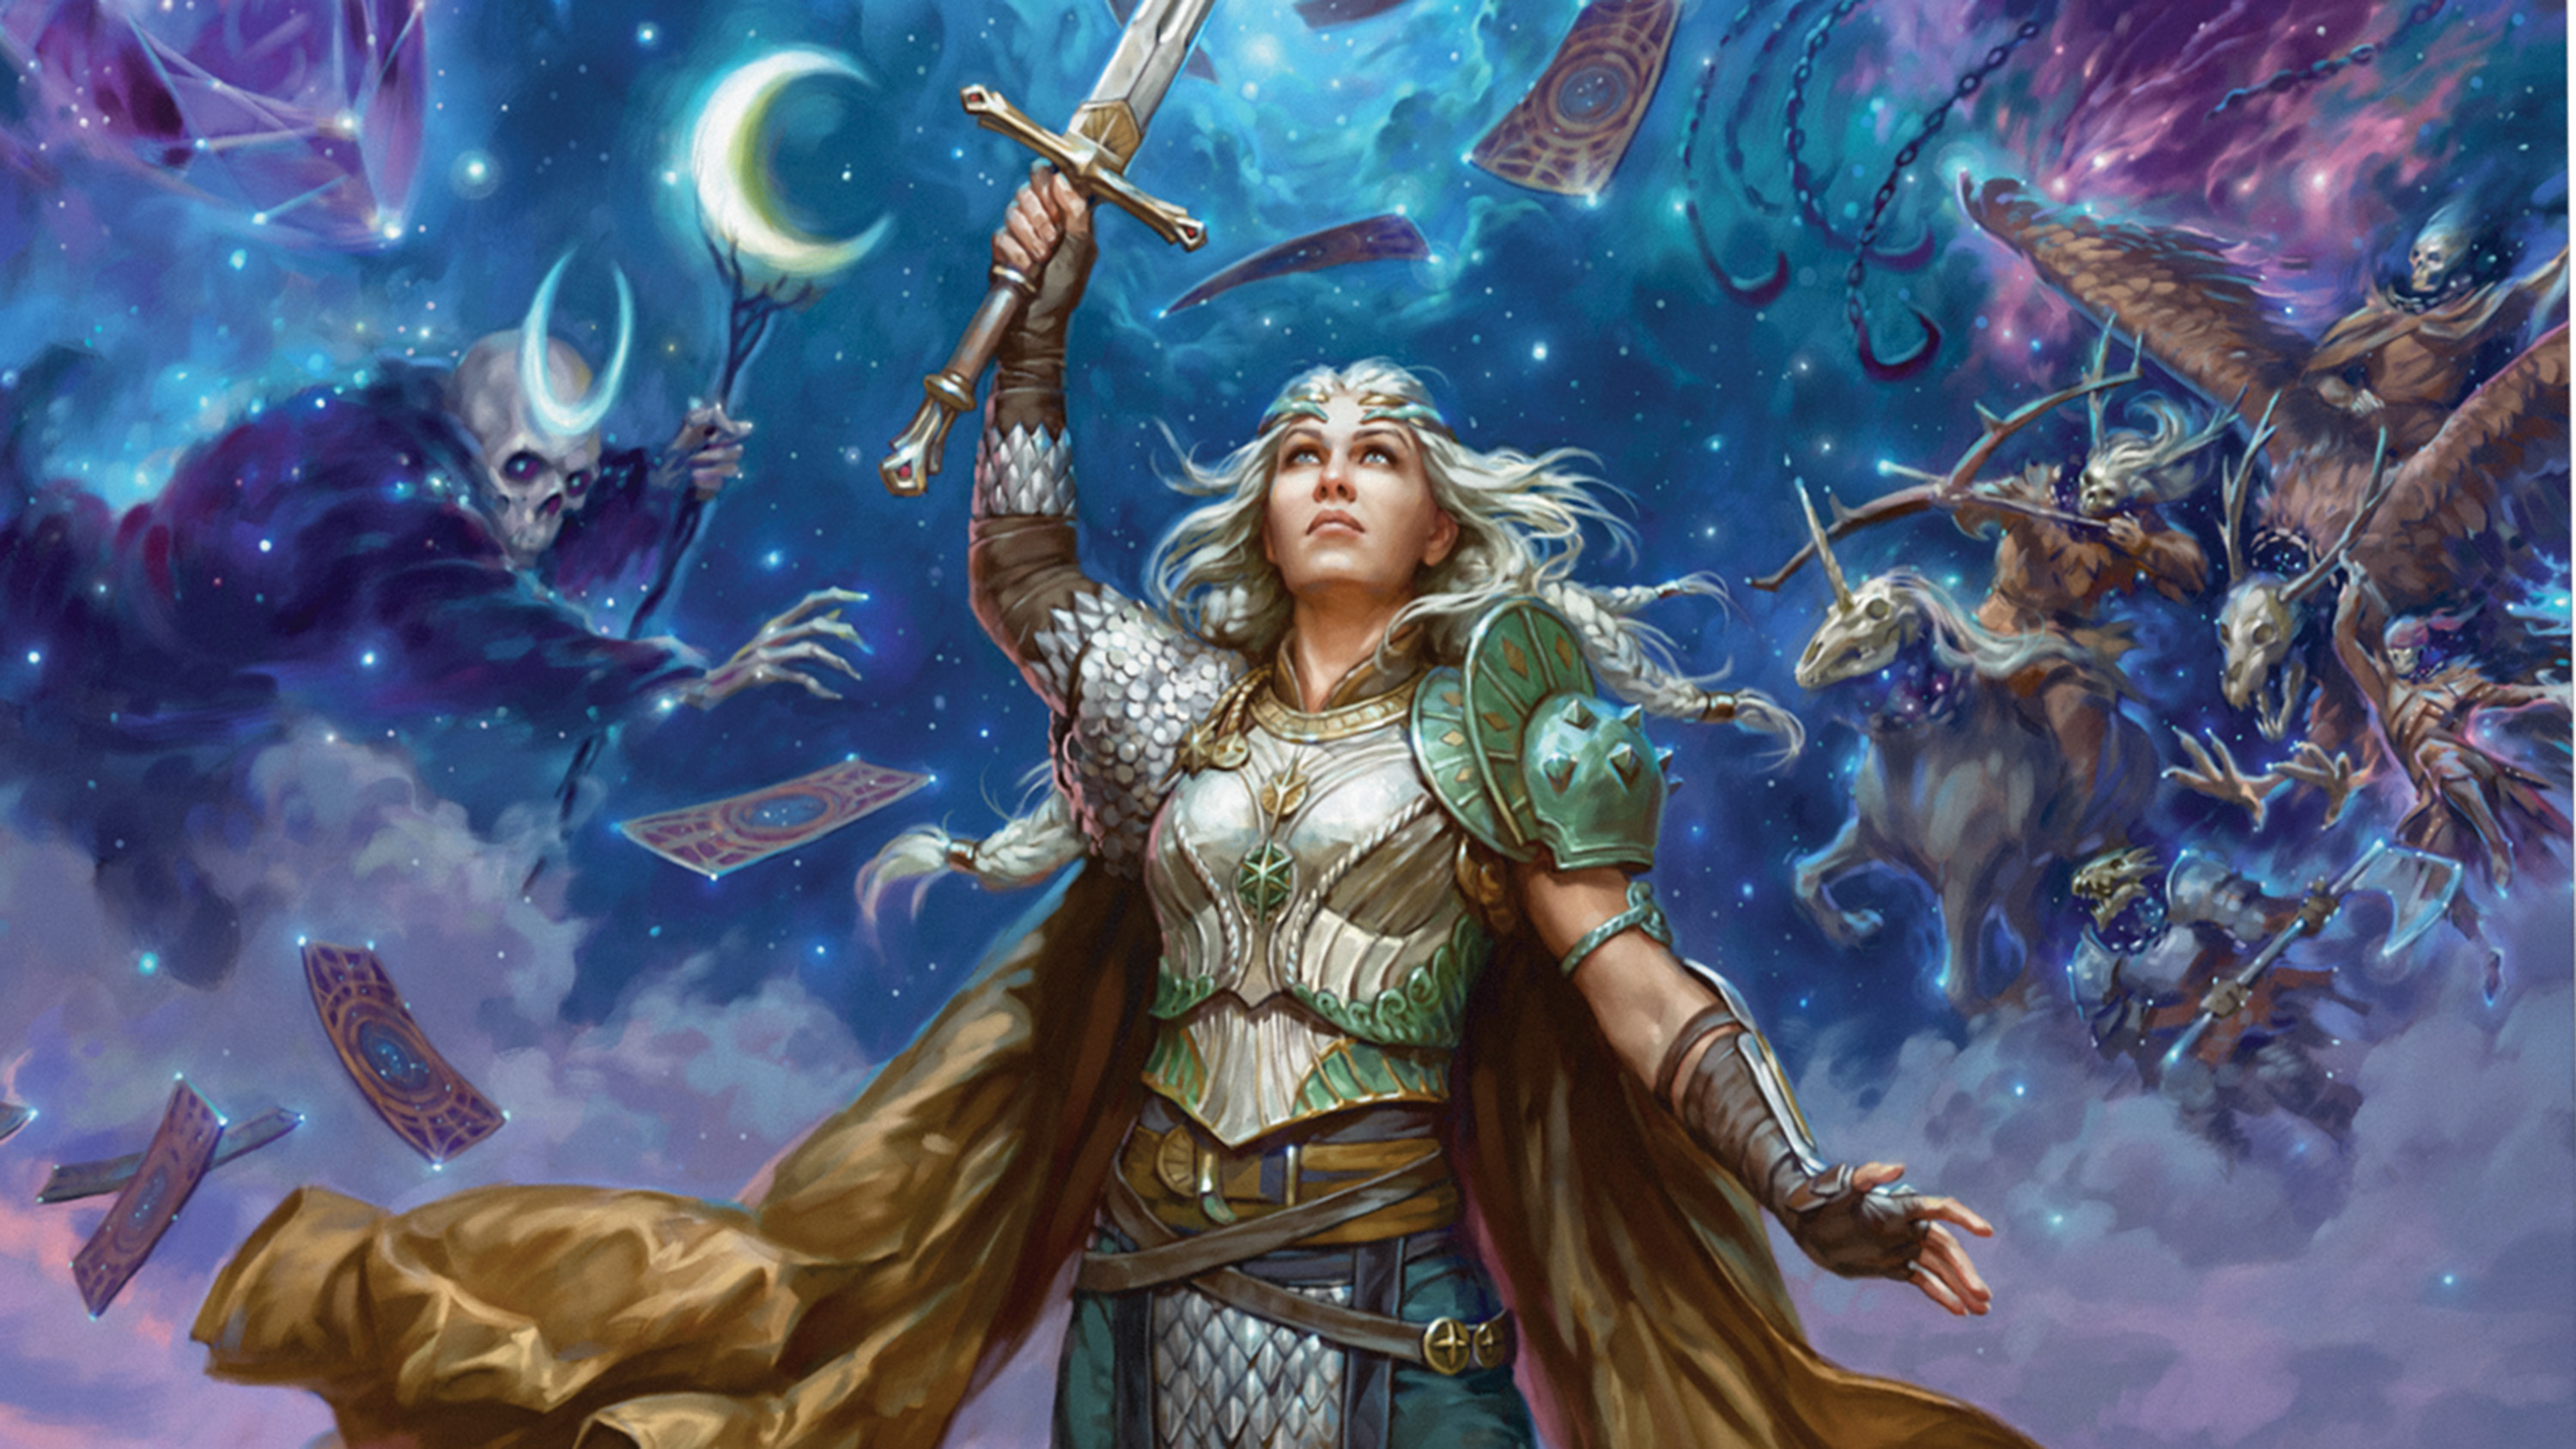 Cover art for The Book of Many Things, which comes bundled inside The Deck of Many Things — a boxed set of cards from Wizards of the Coast, made for Dungeons & Dragons. It shows a female-presenting person in metal armor holding a sword aloft. The heavens open around them, with spectral horses and demonic entities reaching toward their sword.